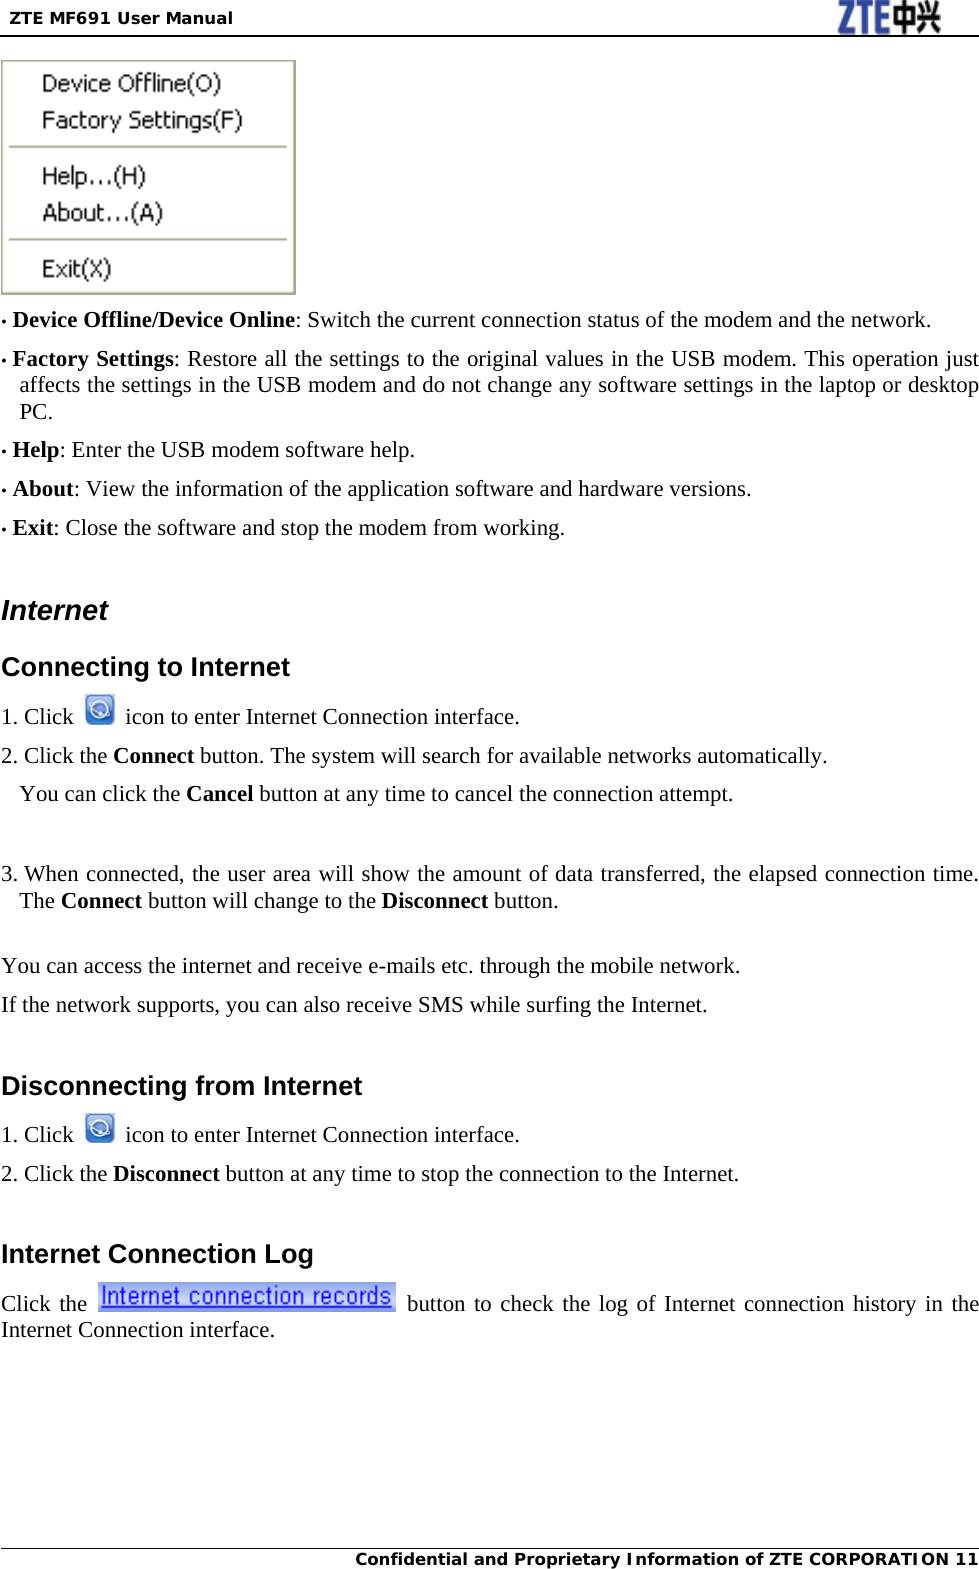  ZTE MF691 User Manual Confidential and Proprietary Information of ZTE CORPORATION 11 • Device Offline/Device Online: Switch the current connection status of the modem and the network. • Factory Settings: Restore all the settings to the original values in the USB modem. This operation just affects the settings in the USB modem and do not change any software settings in the laptop or desktop PC. • Help: Enter the USB modem software help. • About: View the information of the application software and hardware versions. • Exit: Close the software and stop the modem from working.  Internet Connecting to Internet 1. Click    icon to enter Internet Connection interface. 2. Click the Connect button. The system will search for available networks automatically. You can click the Cancel button at any time to cancel the connection attempt.   3. When connected, the user area will show the amount of data transferred, the elapsed connection time. The Connect button will change to the Disconnect button.  You can access the internet and receive e-mails etc. through the mobile network. If the network supports, you can also receive SMS while surfing the Internet.  Disconnecting from Internet 1. Click    icon to enter Internet Connection interface. 2. Click the Disconnect button at any time to stop the connection to the Internet.  Internet Connection Log Click the   button to check the log of Internet connection history in the Internet Connection interface. 